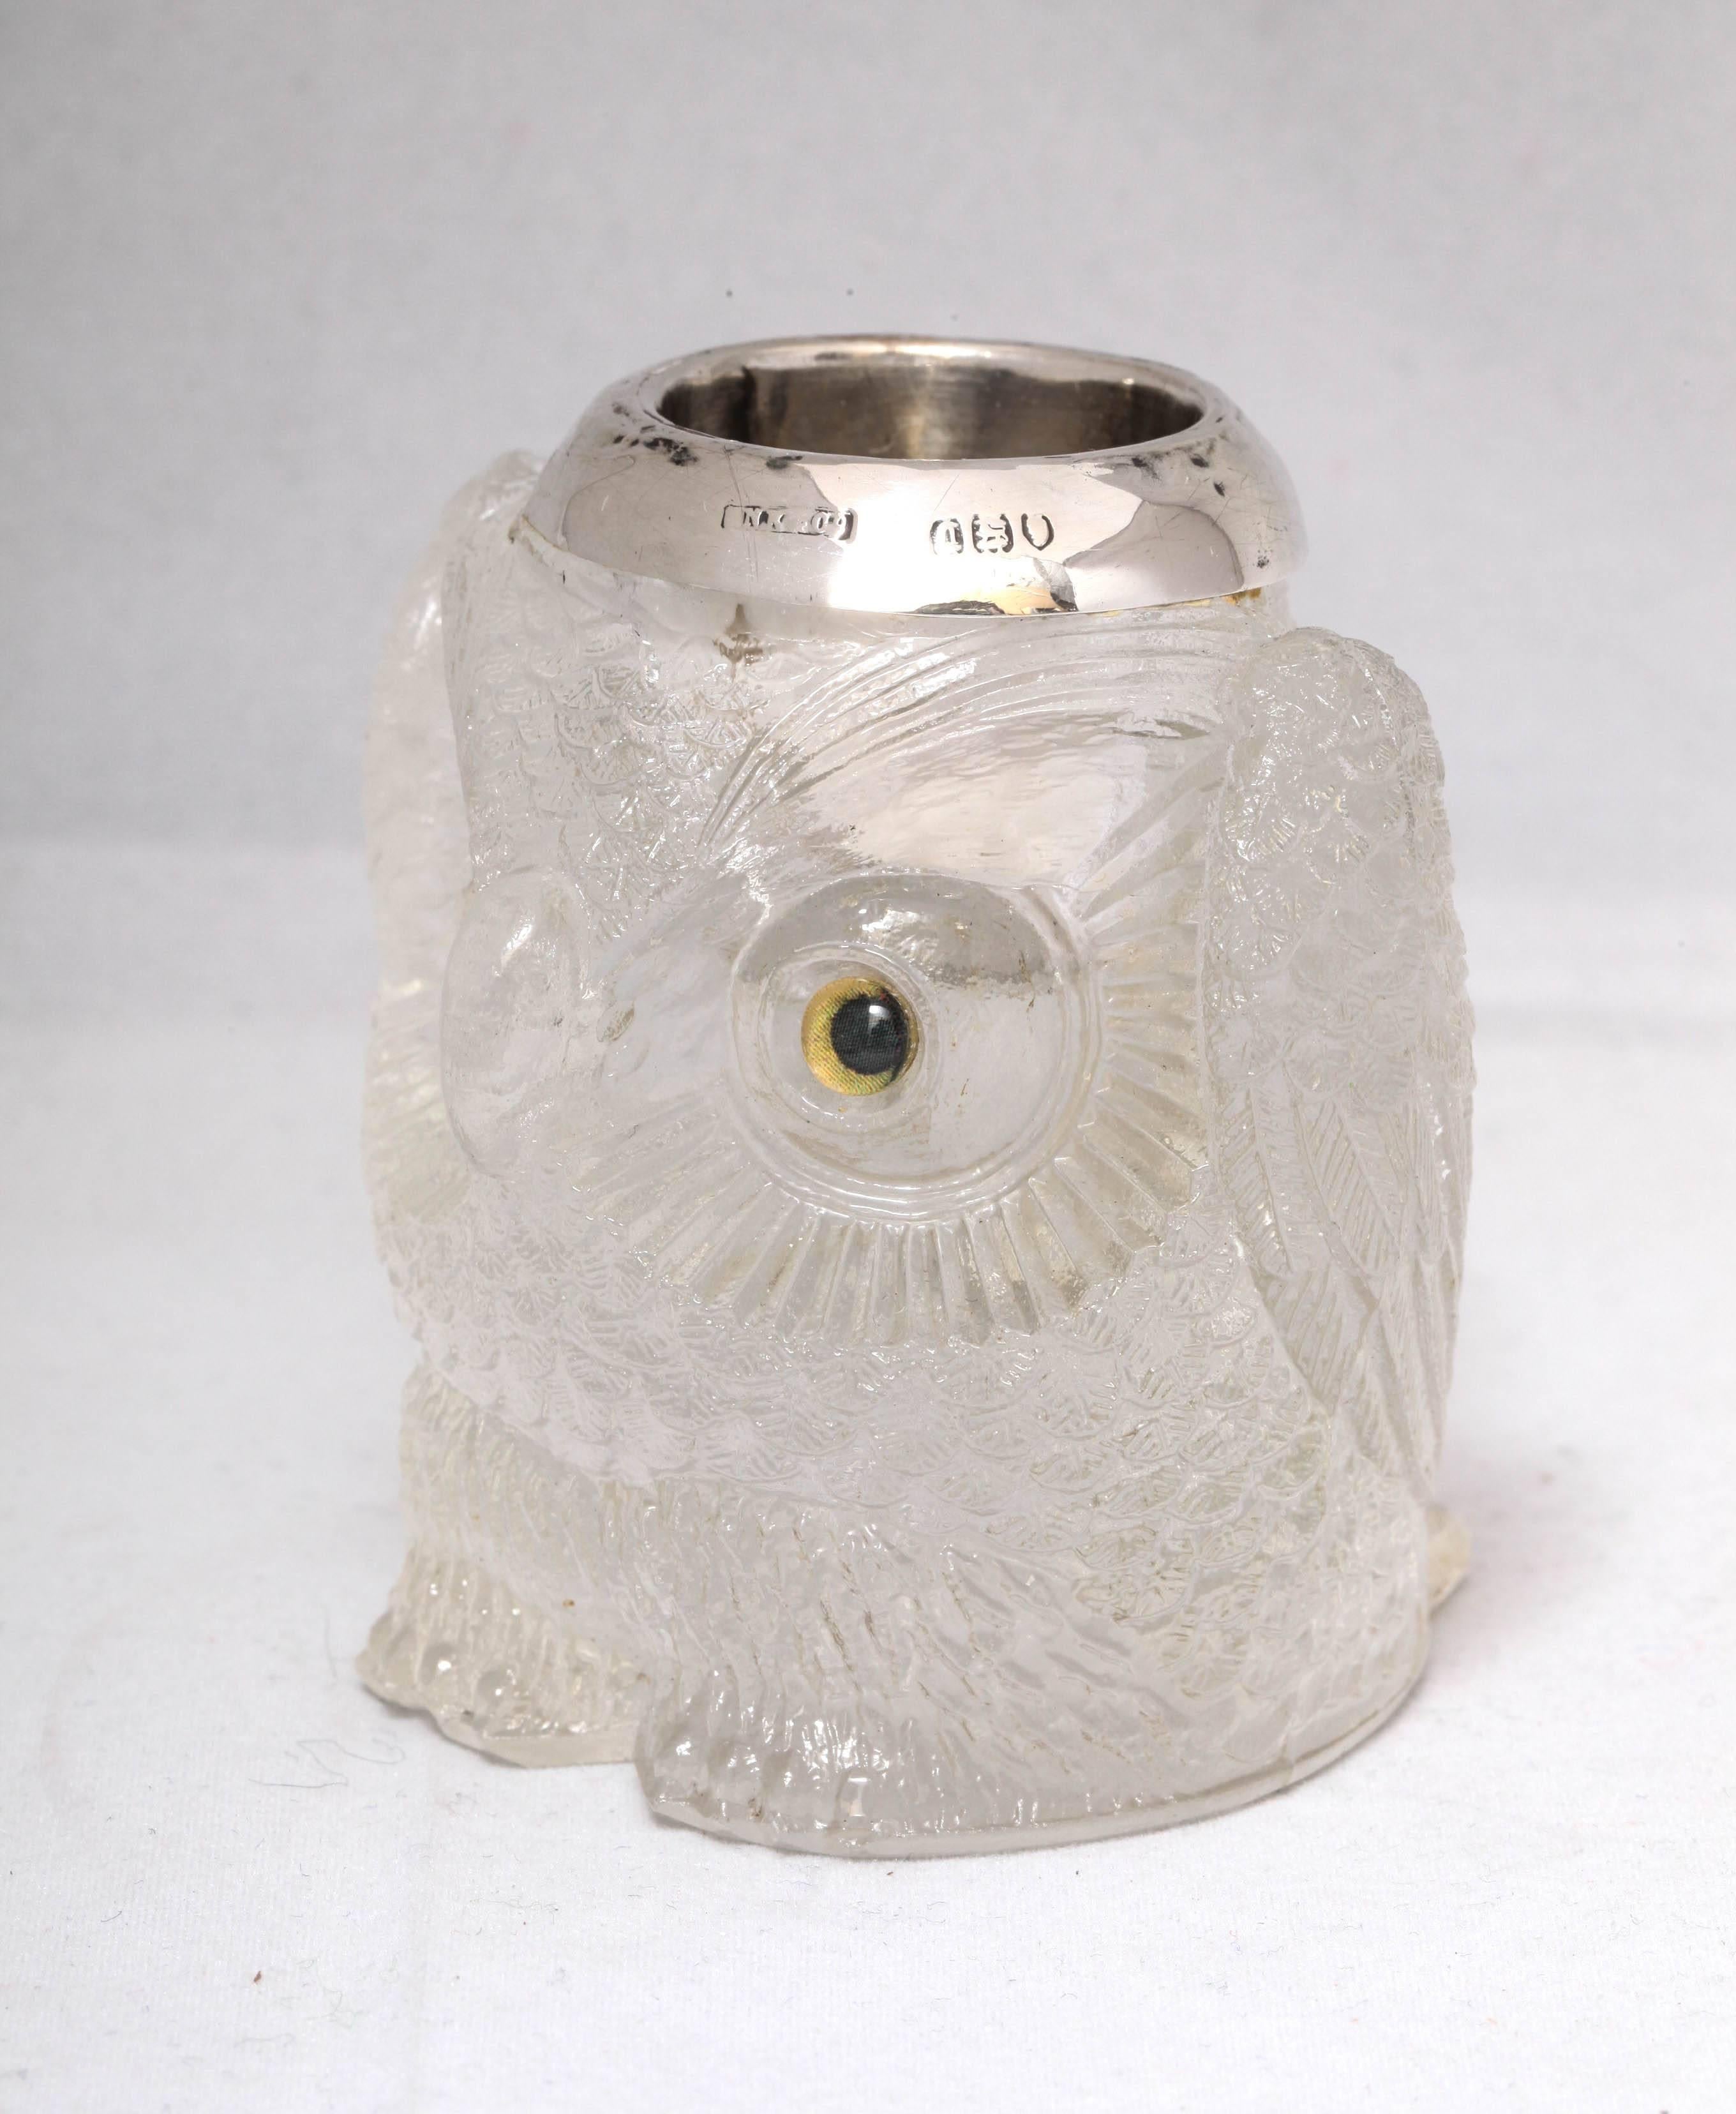 Rare and Unusual Edwardian Sterling Silver-Mounted Owl Form Match Striker 1